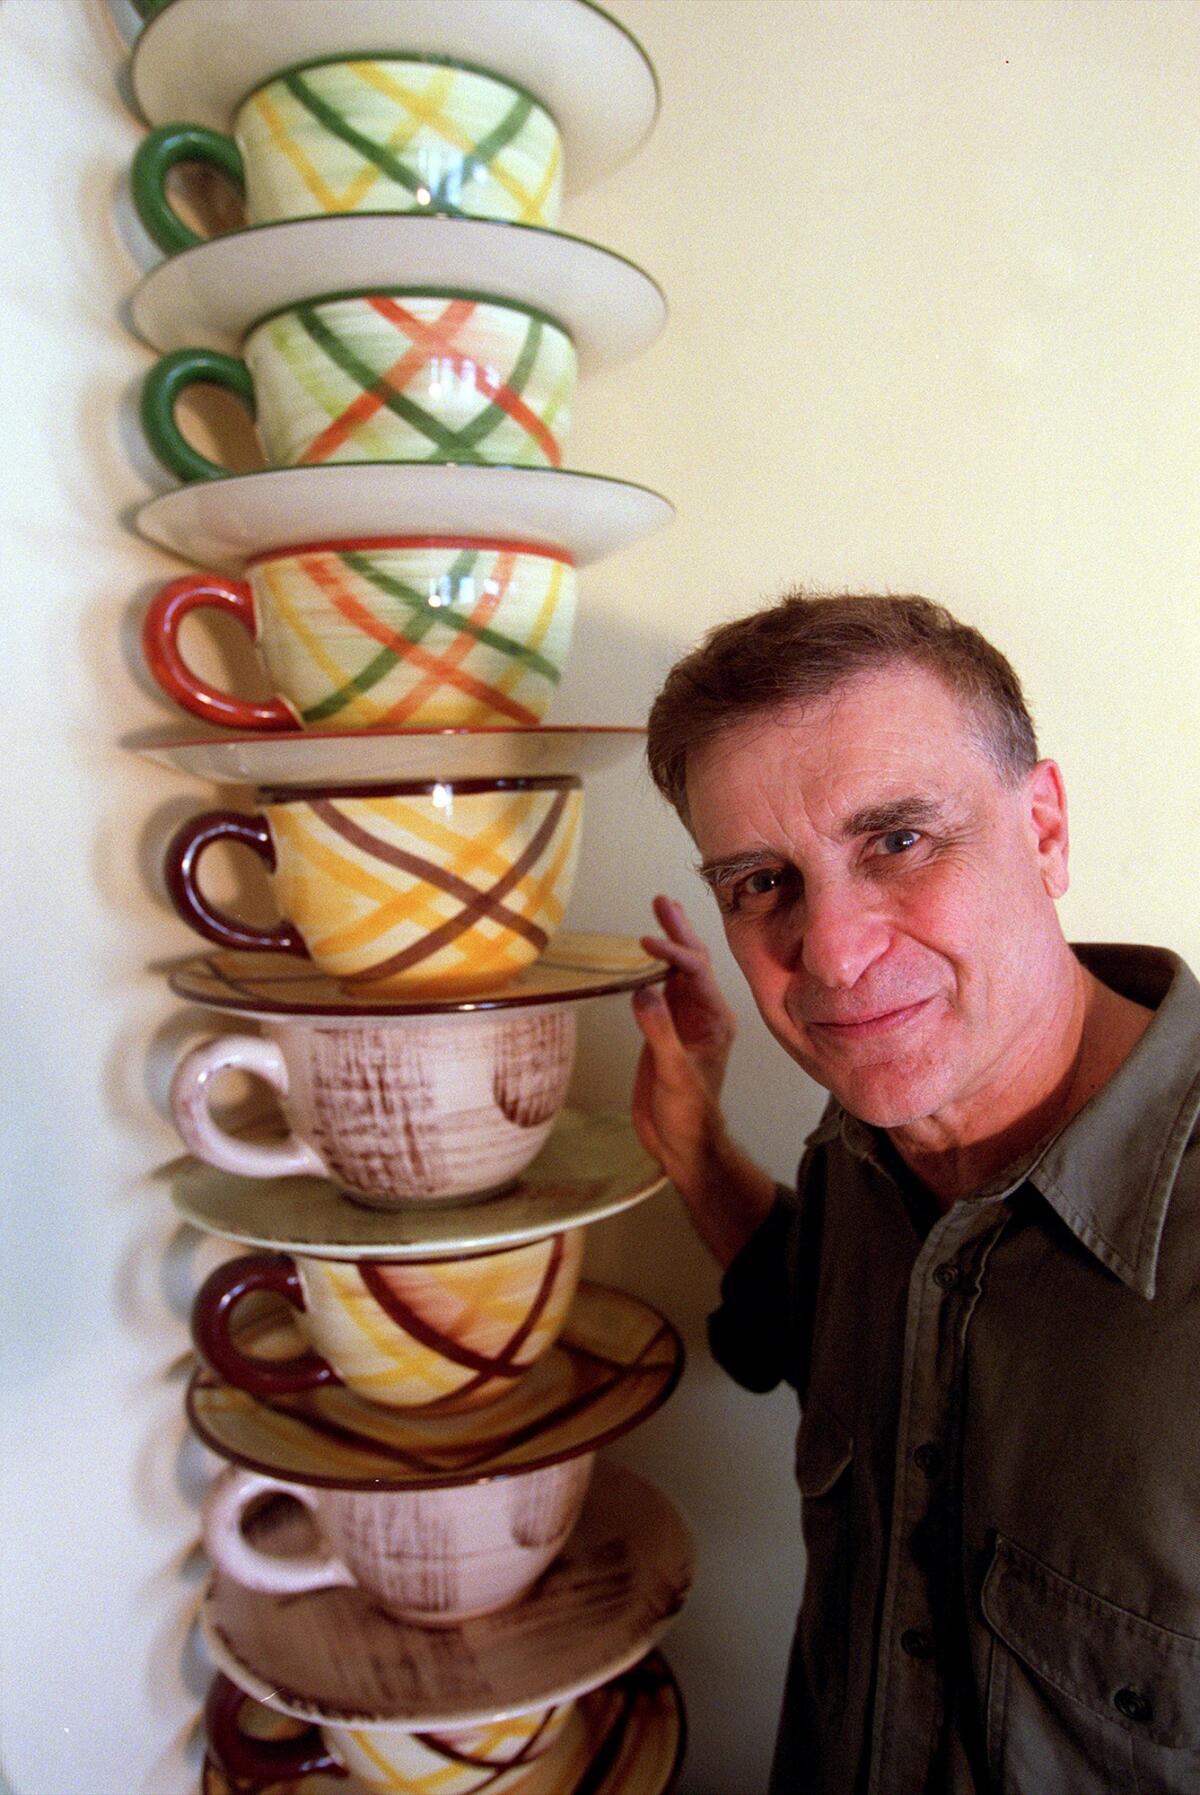 In 2001, Bill Stern posed with quirky pieces from his ceramics collection — a stack of oversized coffee cups.